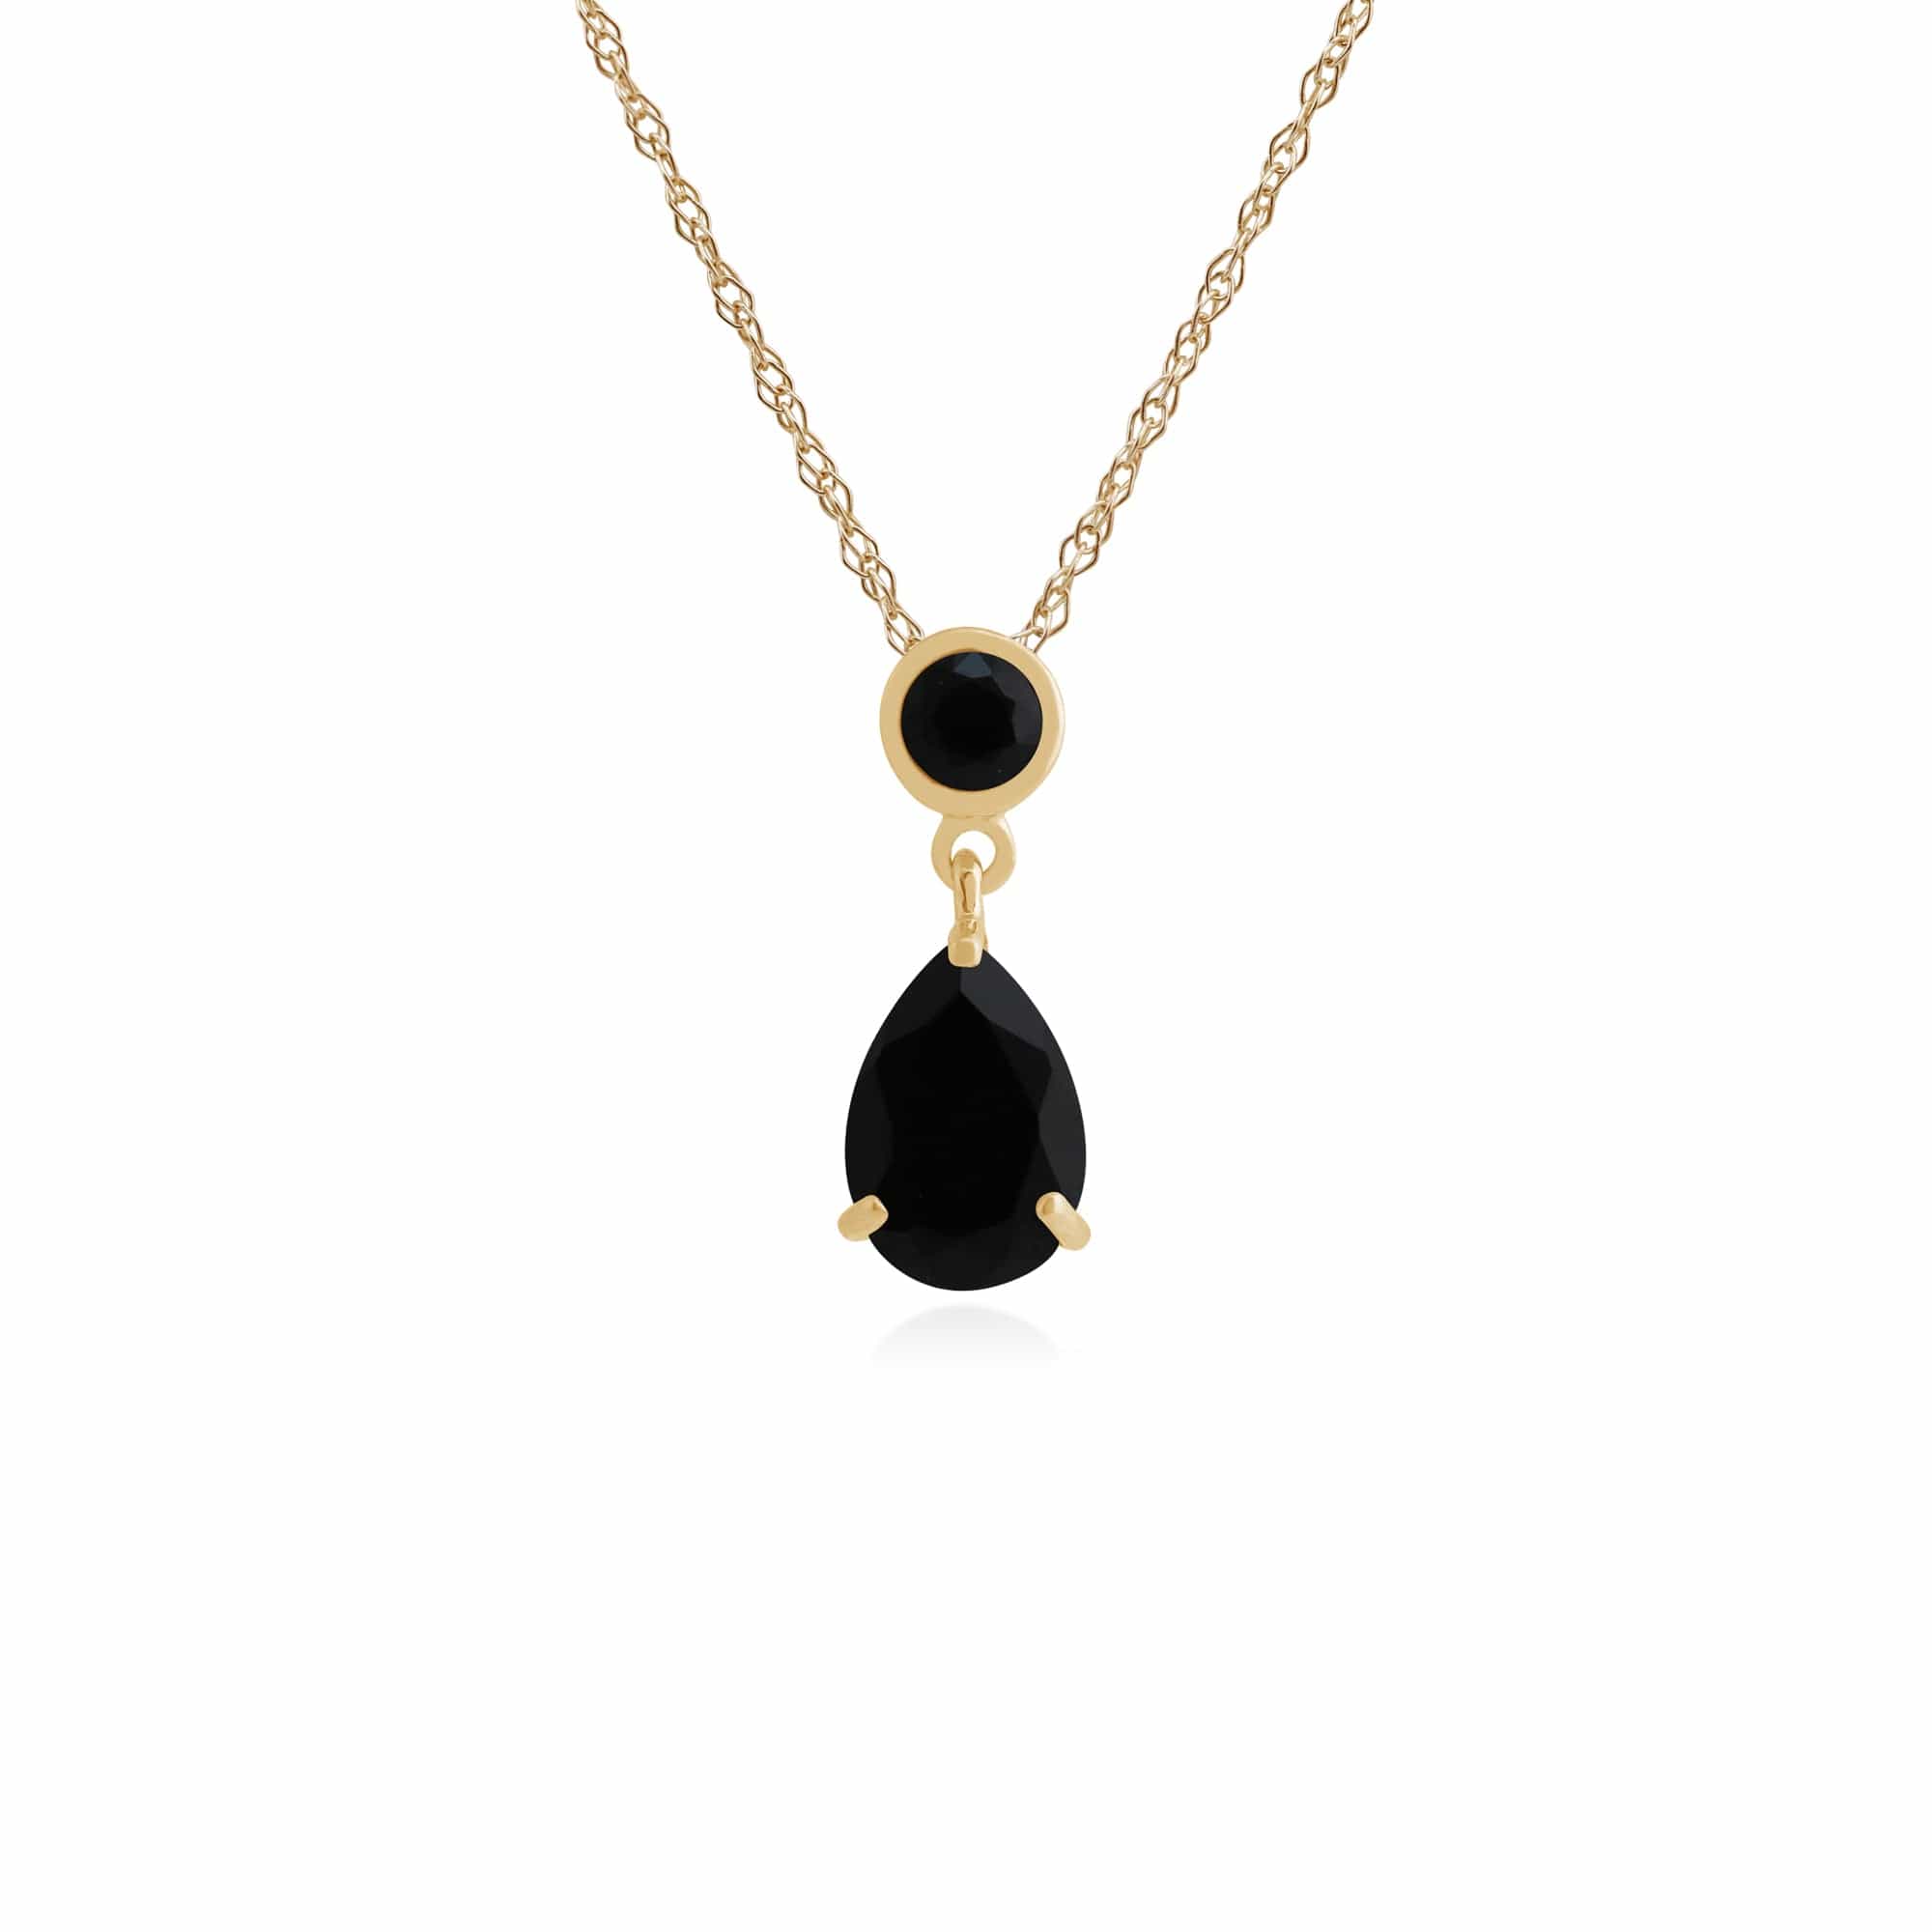 Classic Pear & Round Onyx Drop Earrings & Pendant Set in 9ct Yellow Gold - Gemondo